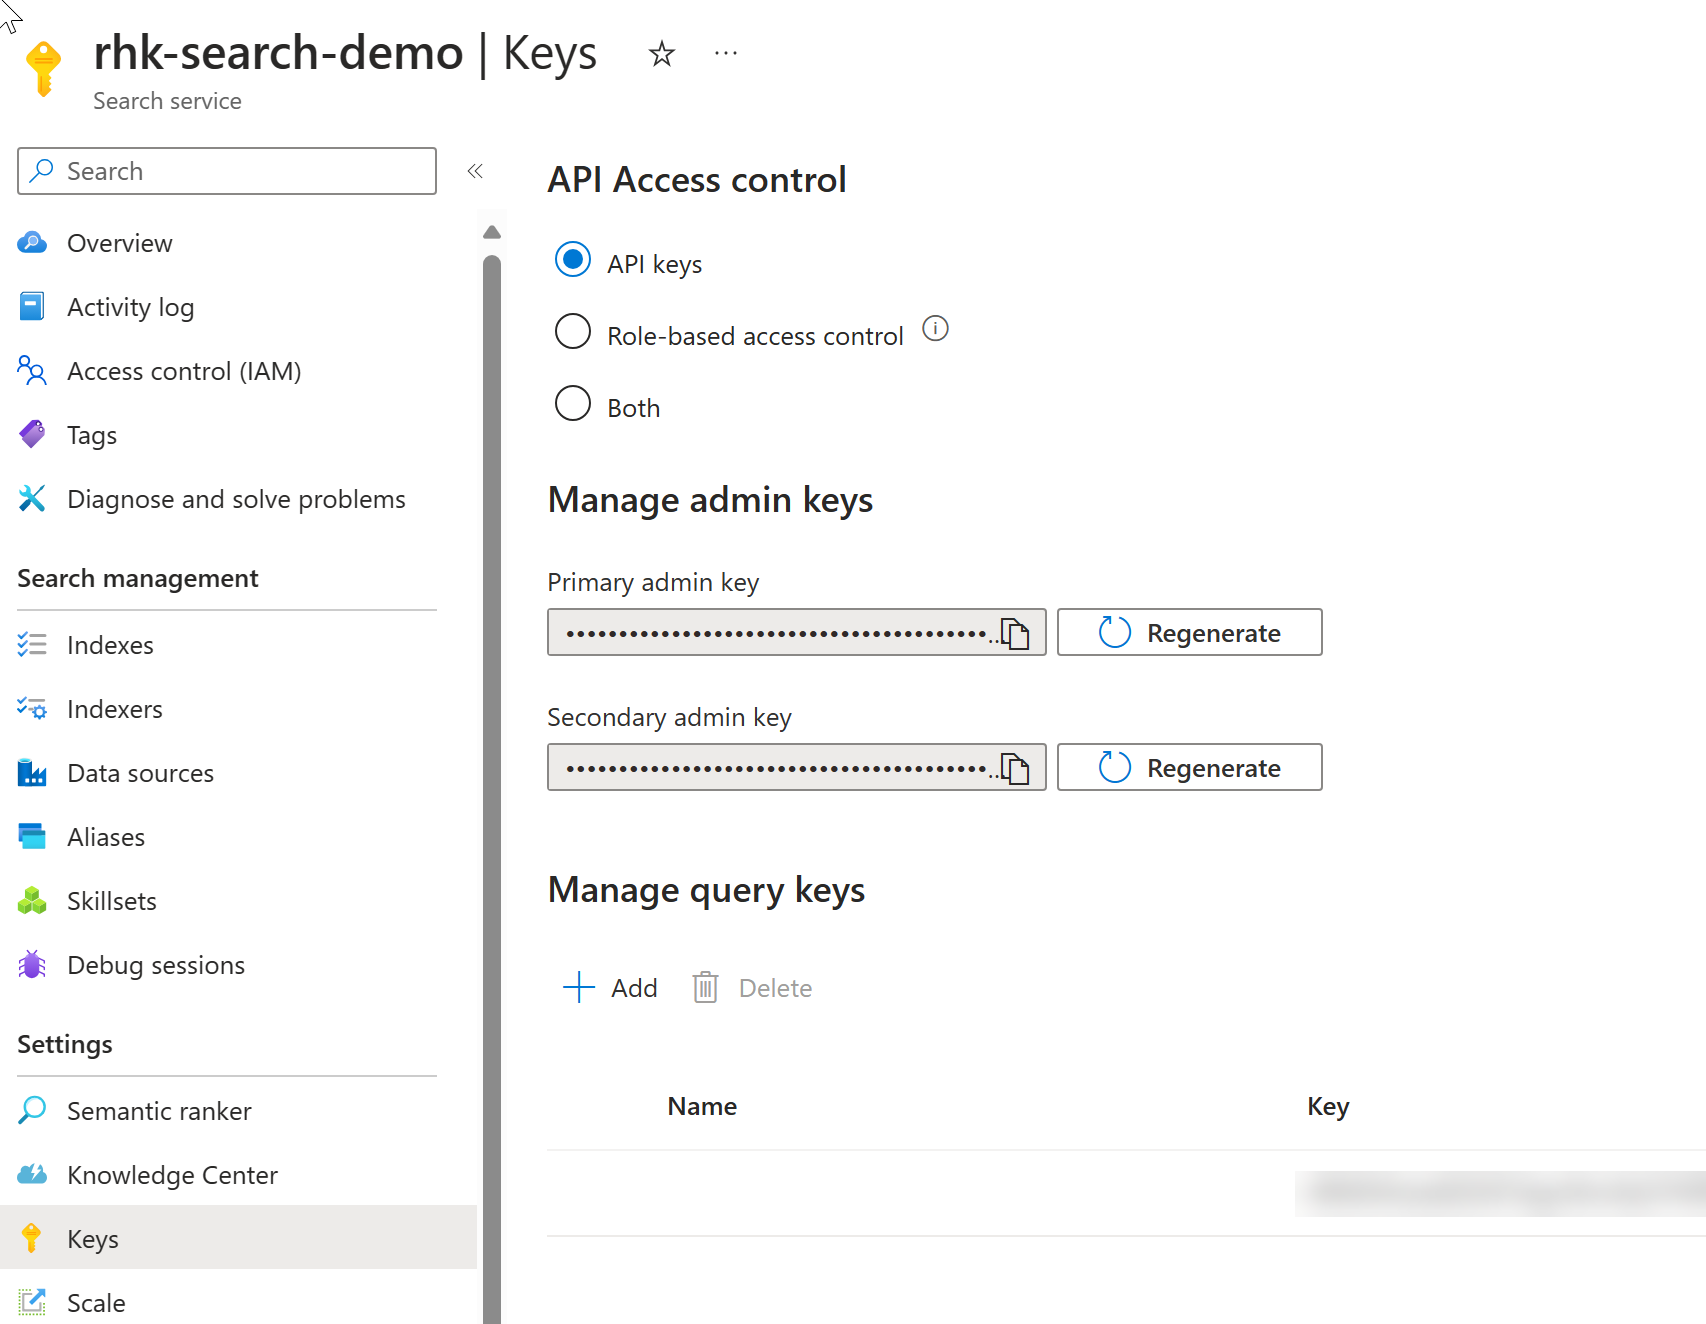 Updating an Azure AI Search Index from Fabric